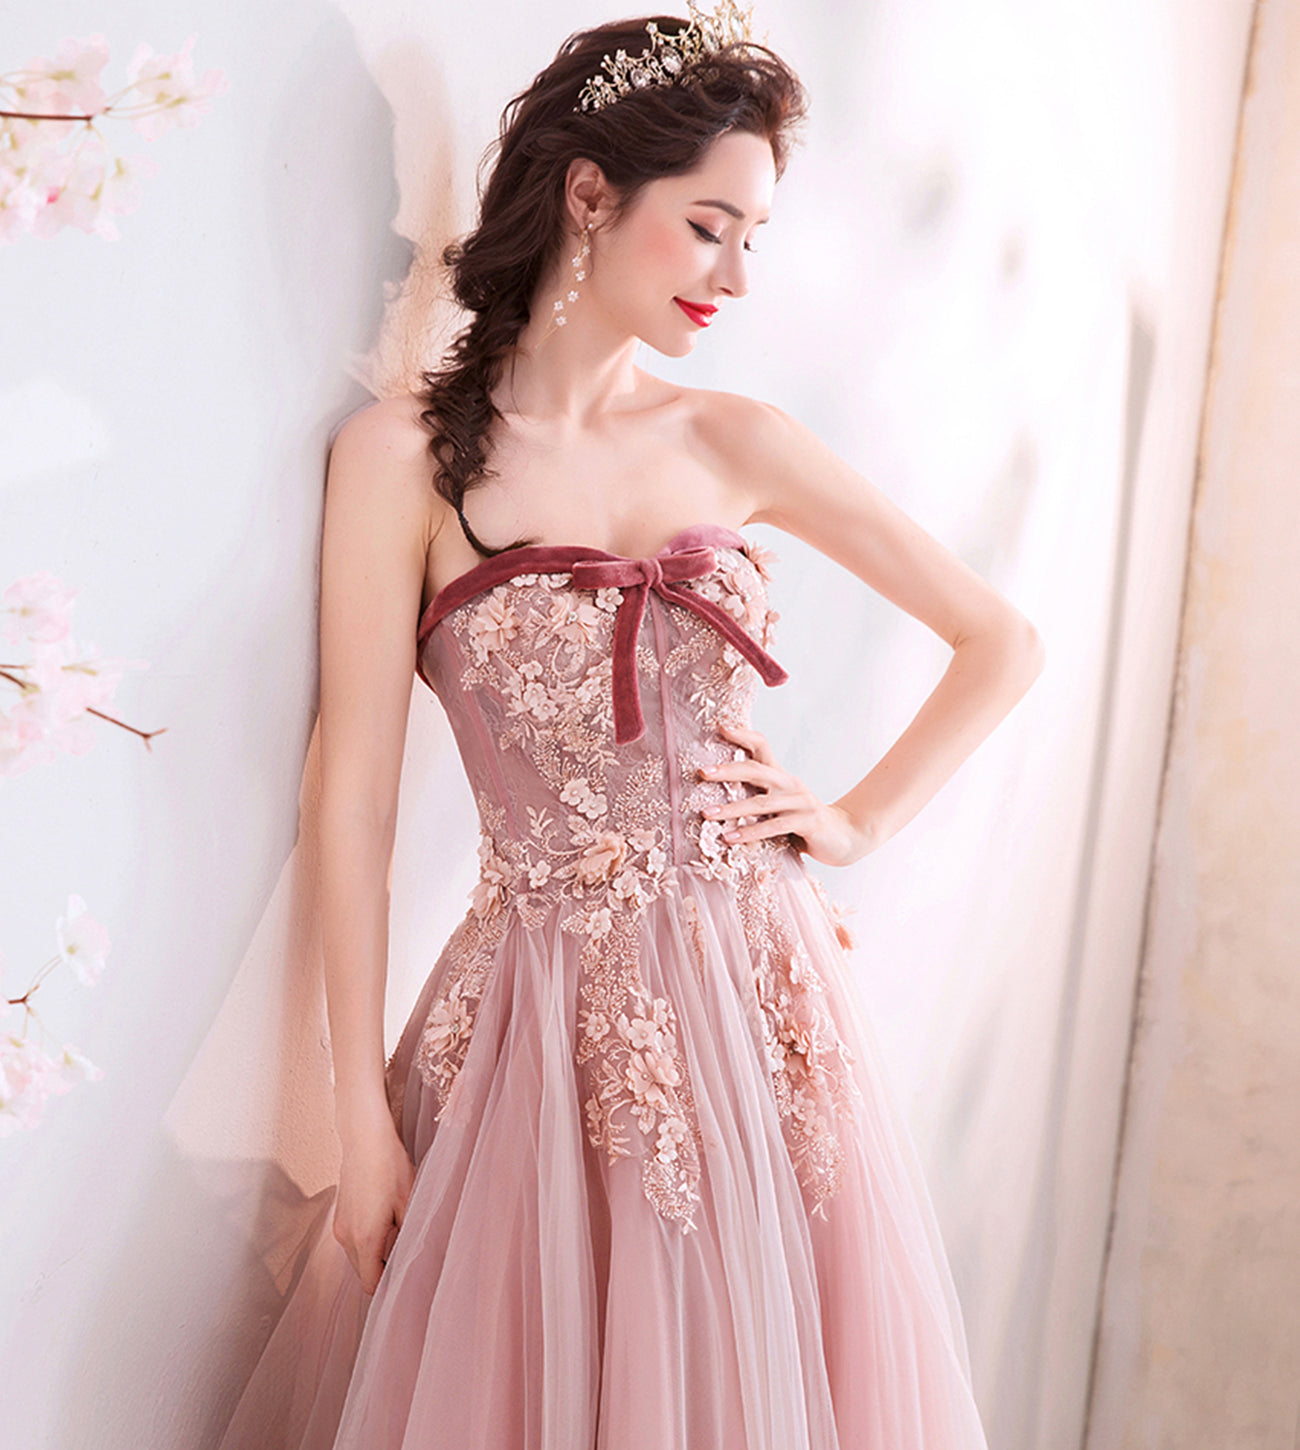 Cute tulle lace long A line prom dress evening dress  8565